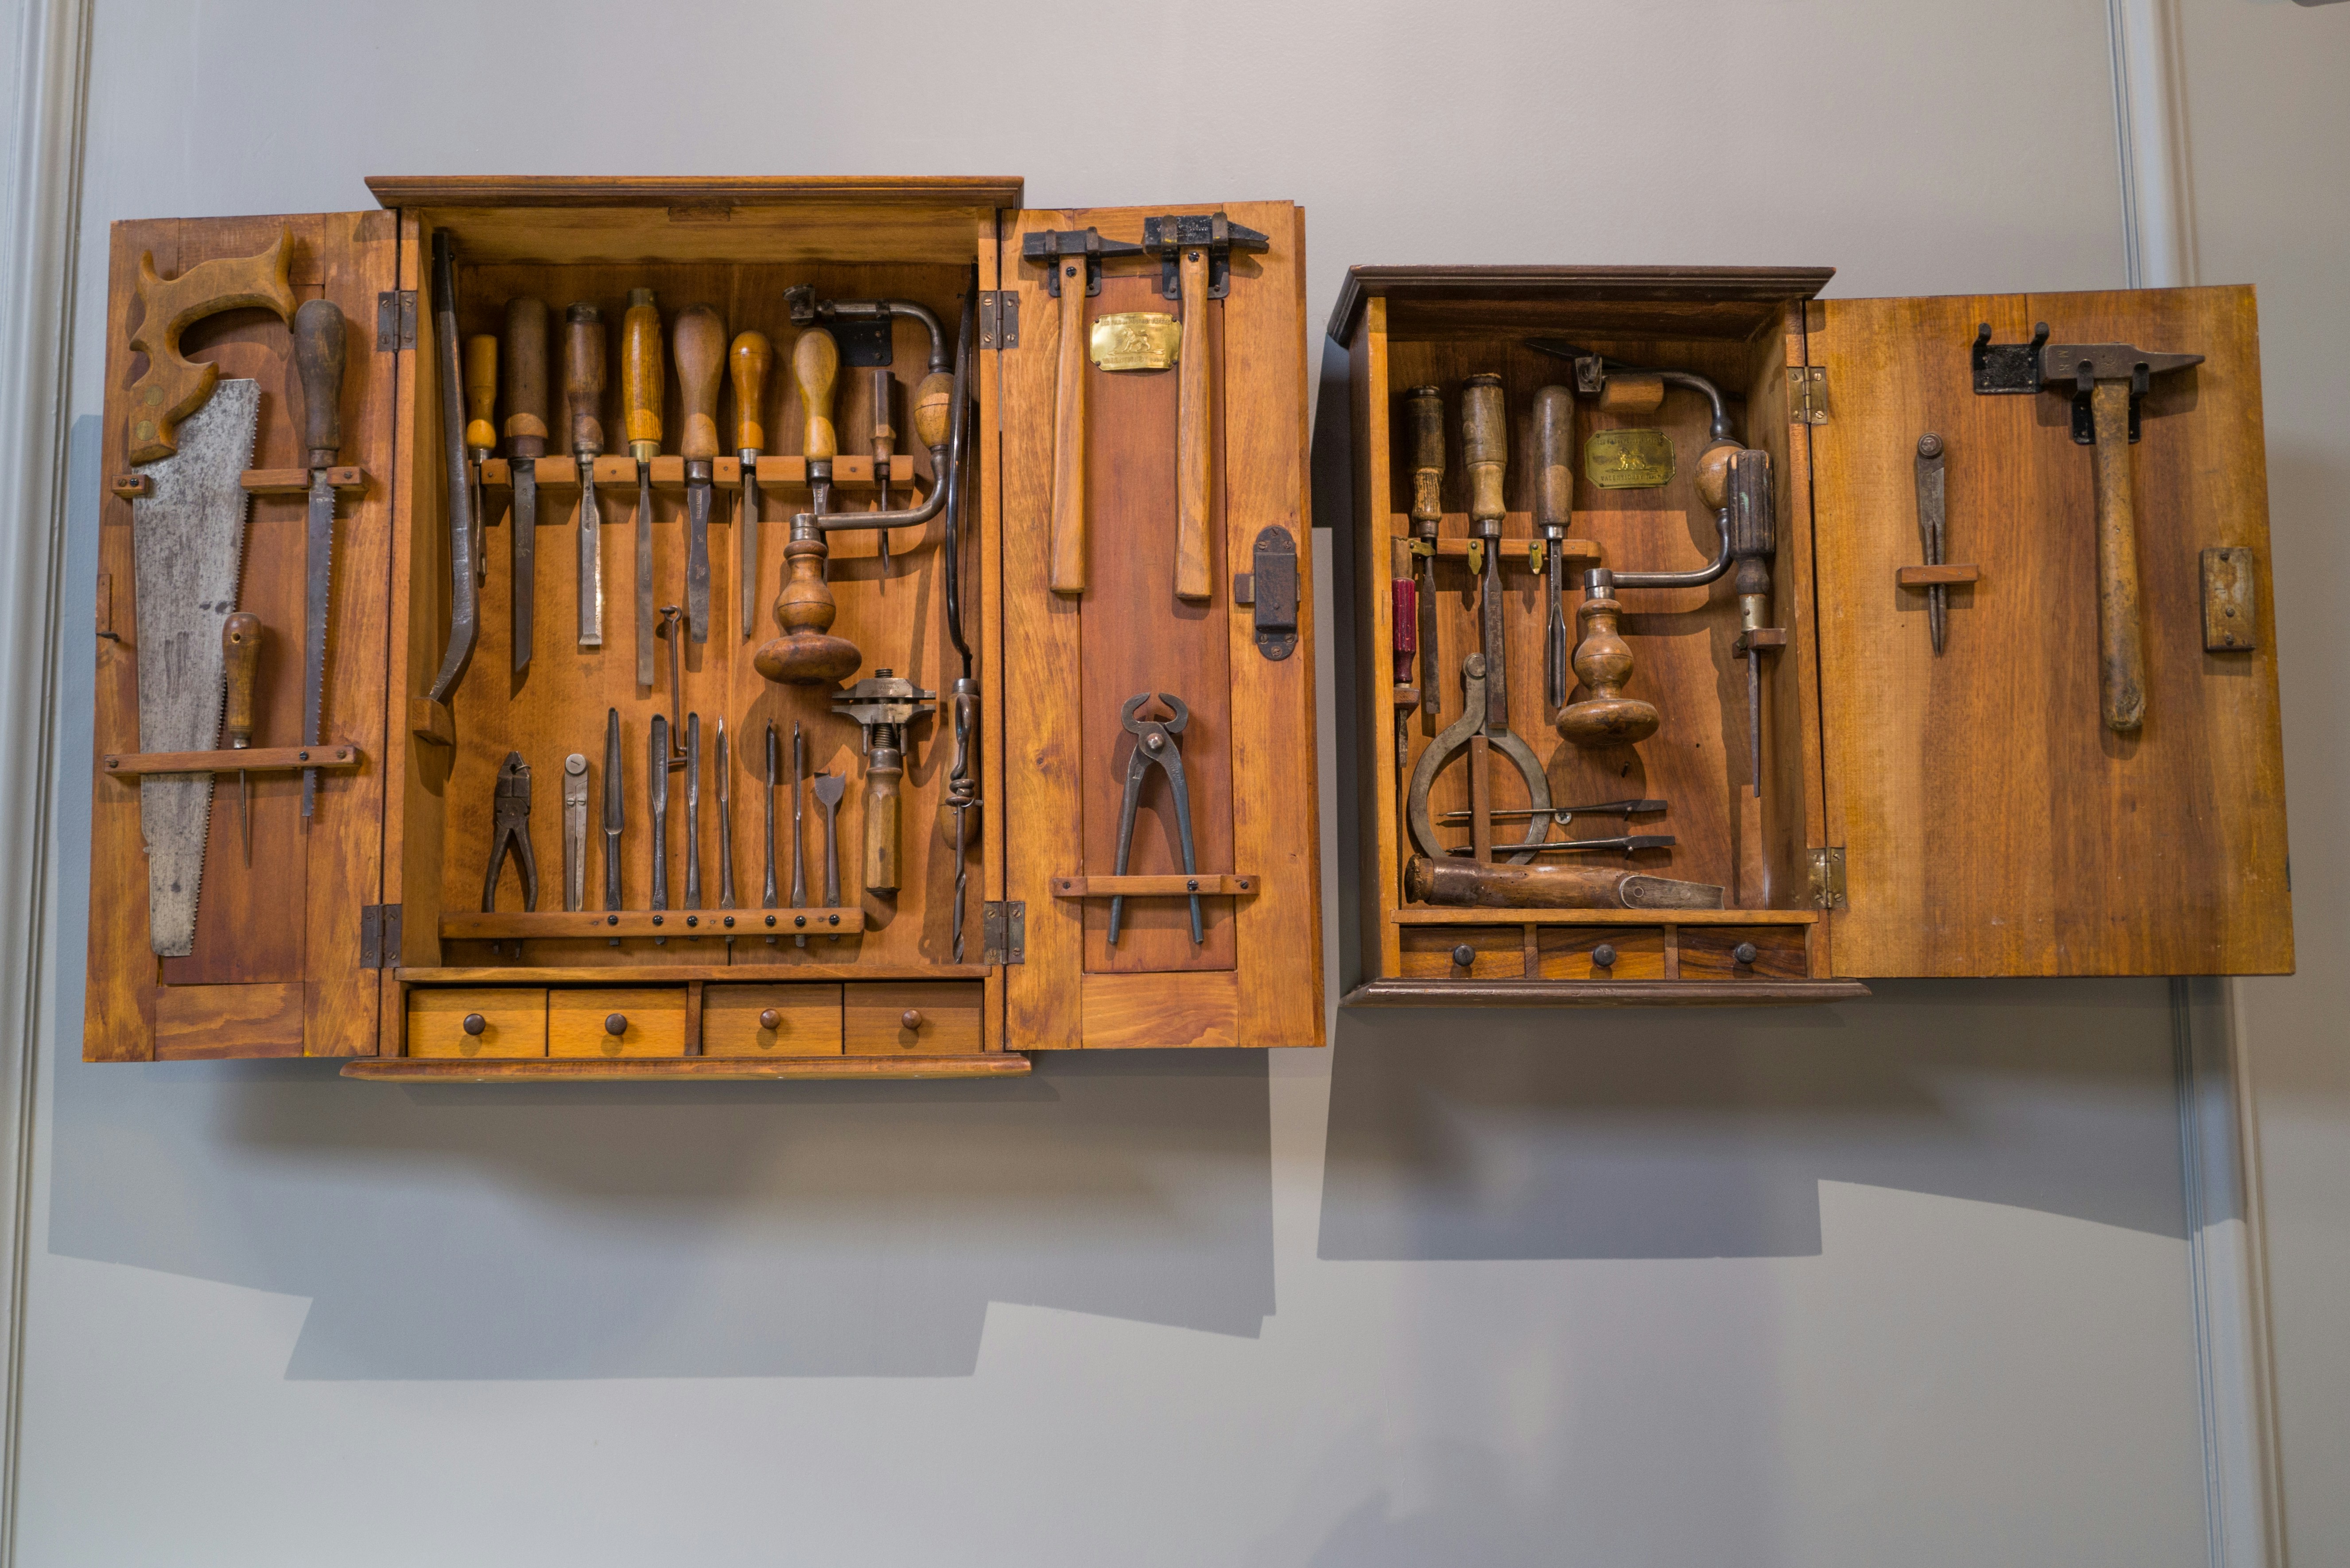 Tool cabinet with old tools in the peugeot Museum